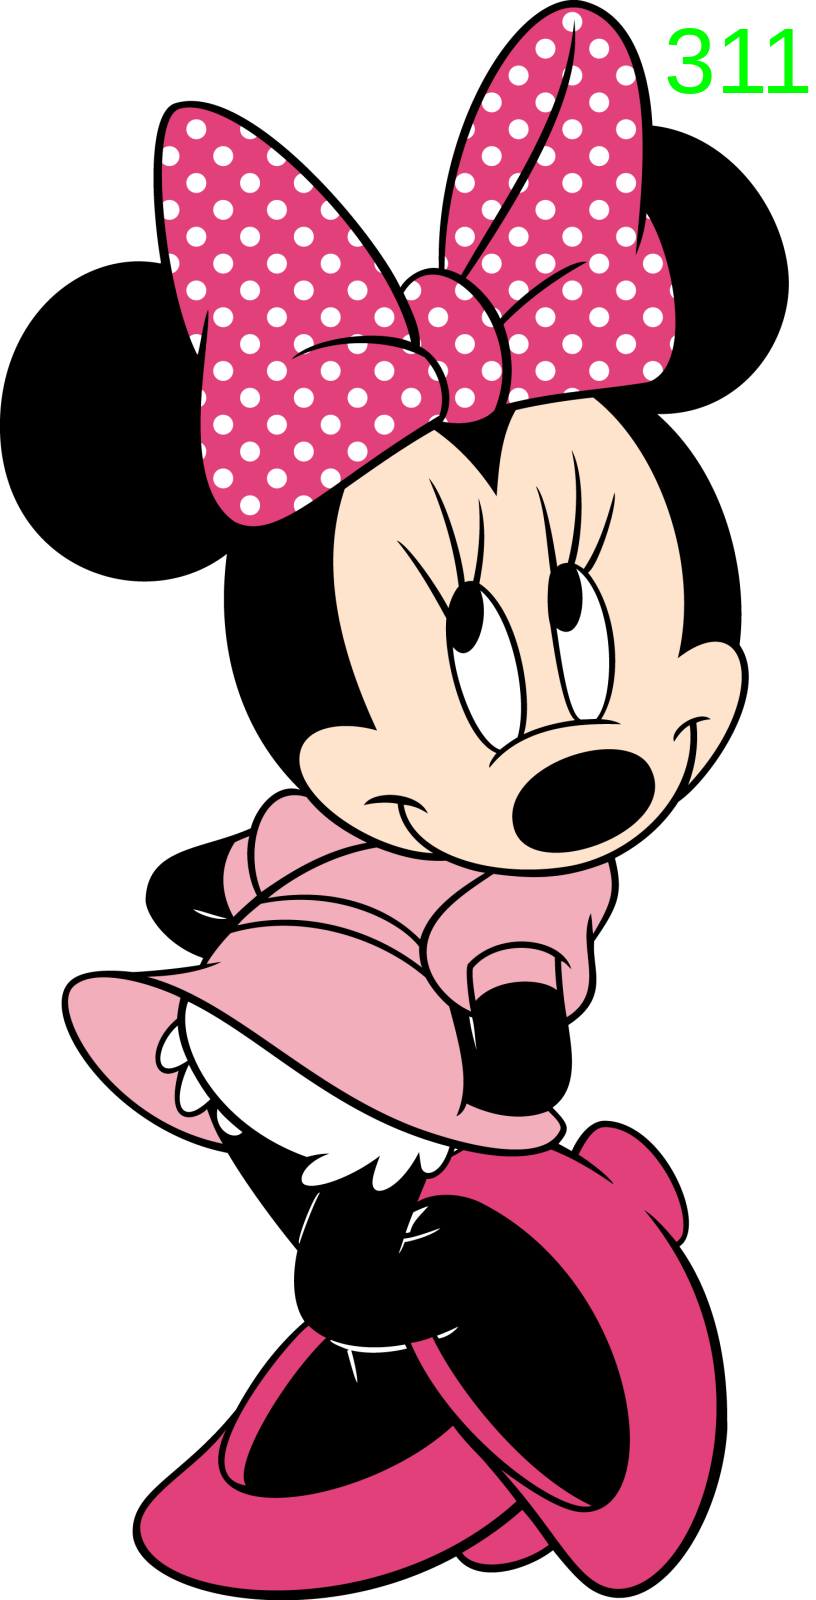 Objects: Minnie Mouse by lilkanyongmail on DeviantArt